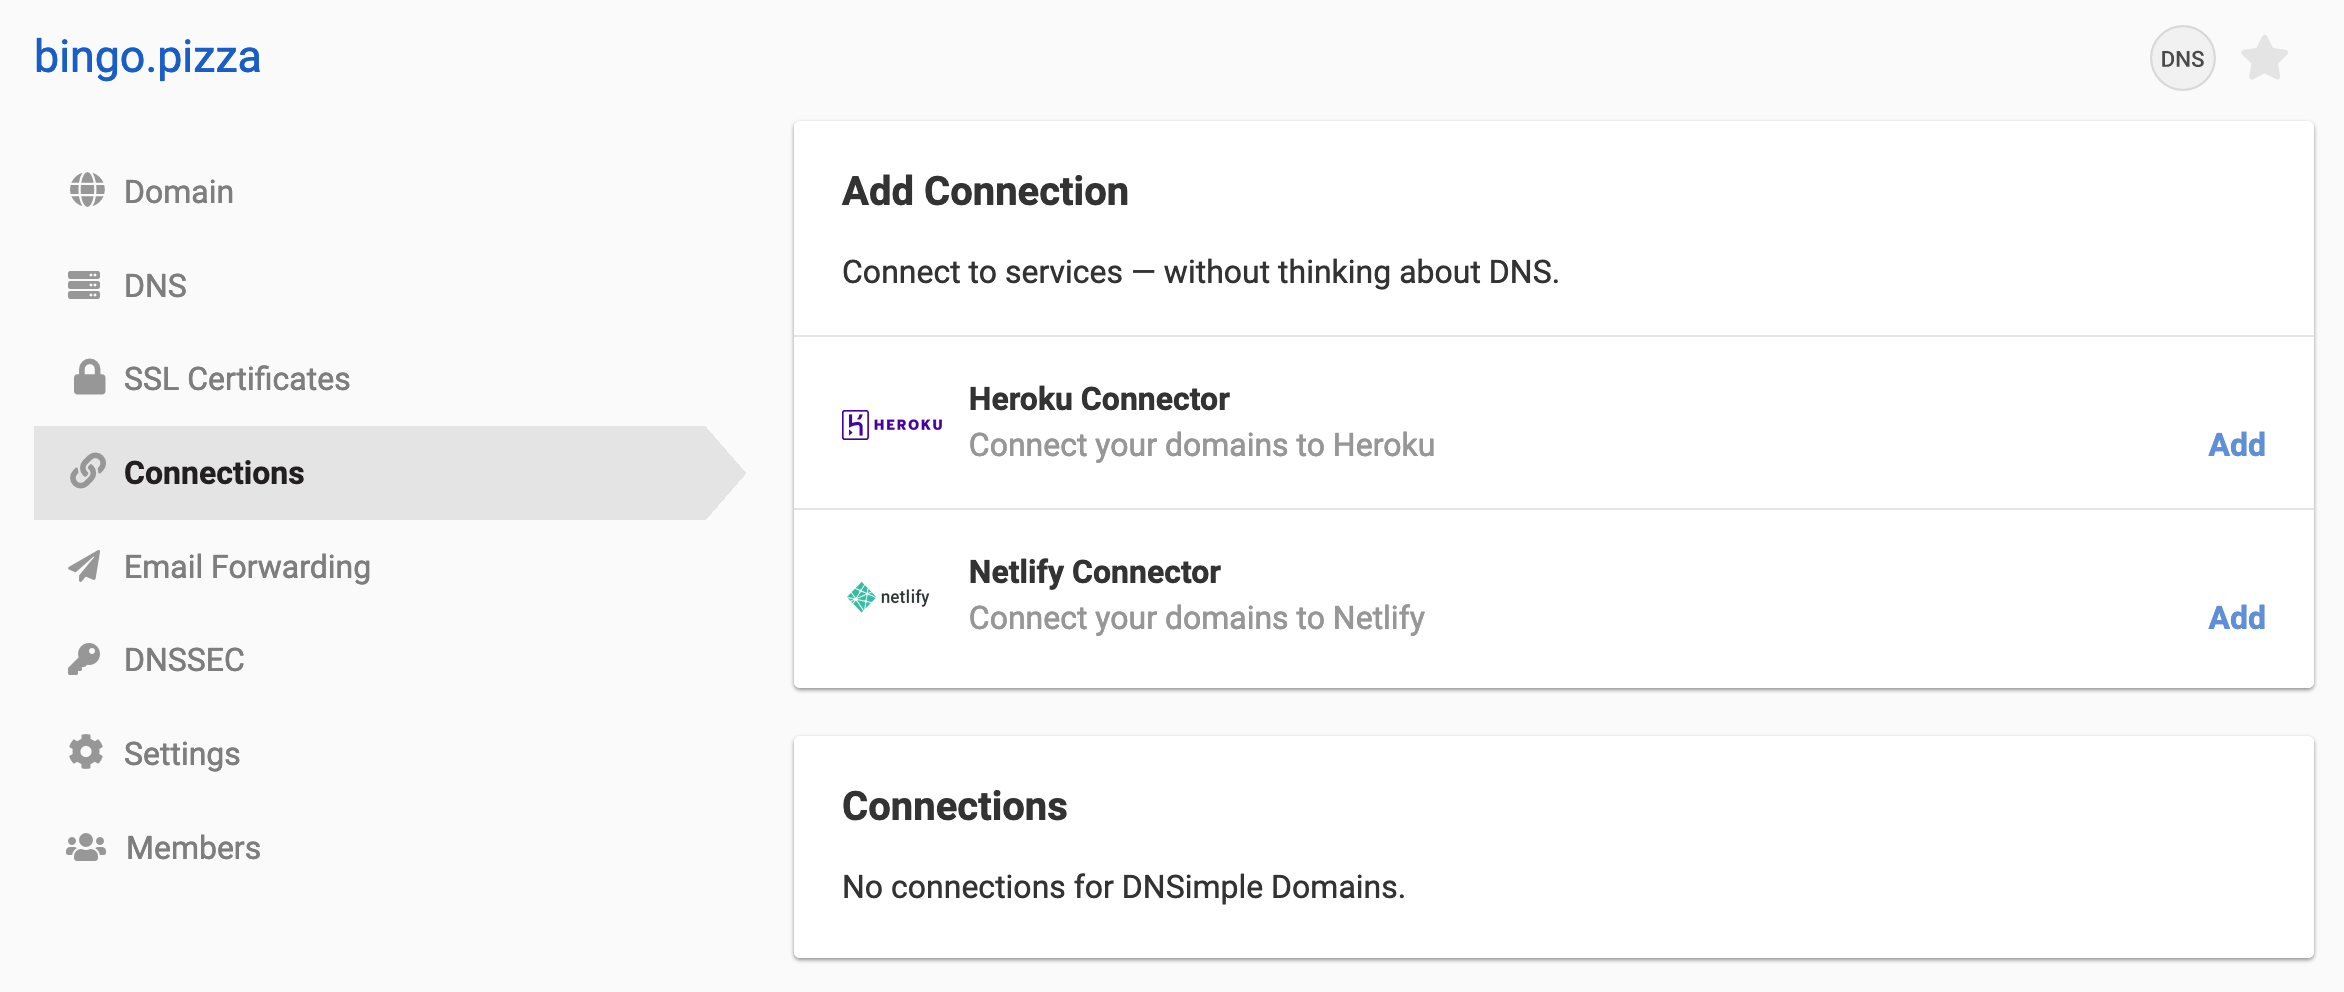 Create a connection to Netlify